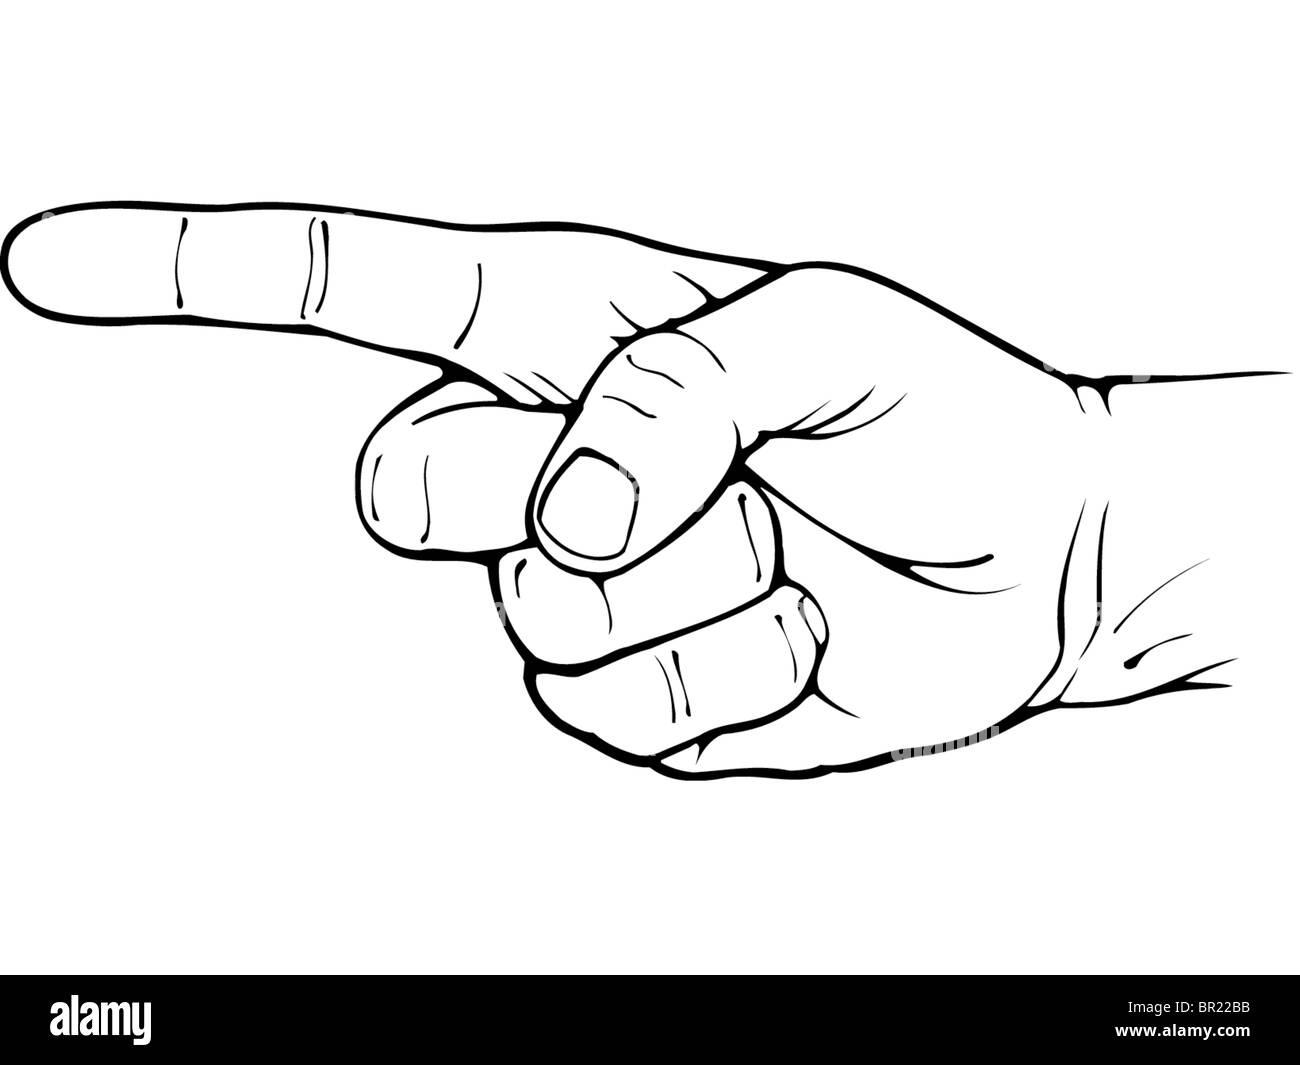 A black and white drawing of a hand pointing Stock Photo, Royalty Free